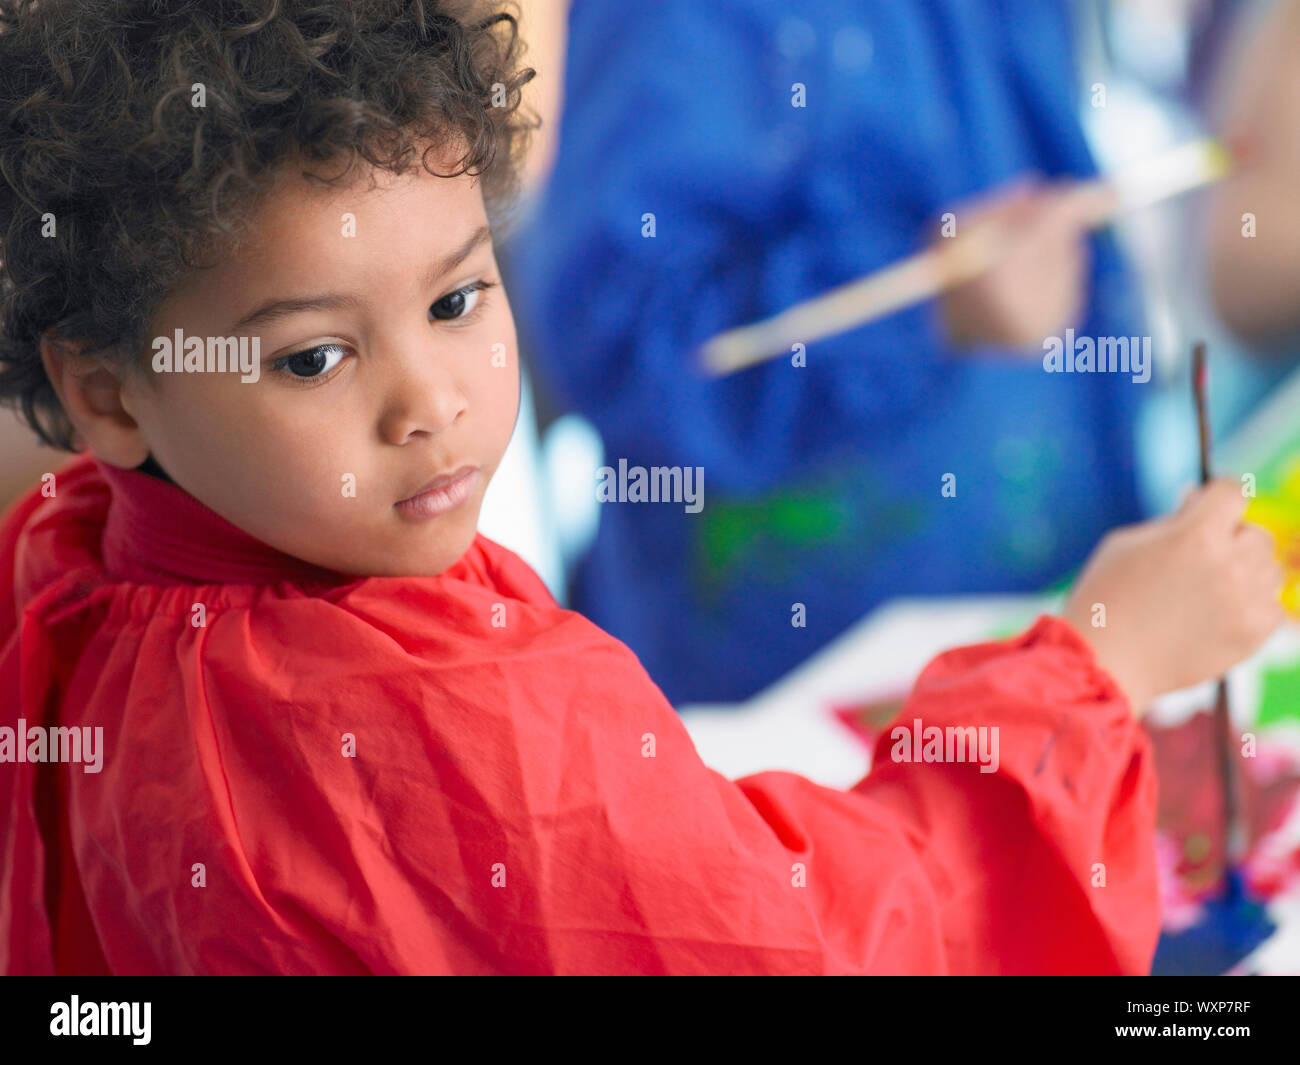 Elementary Student in Art Class Stock Photo